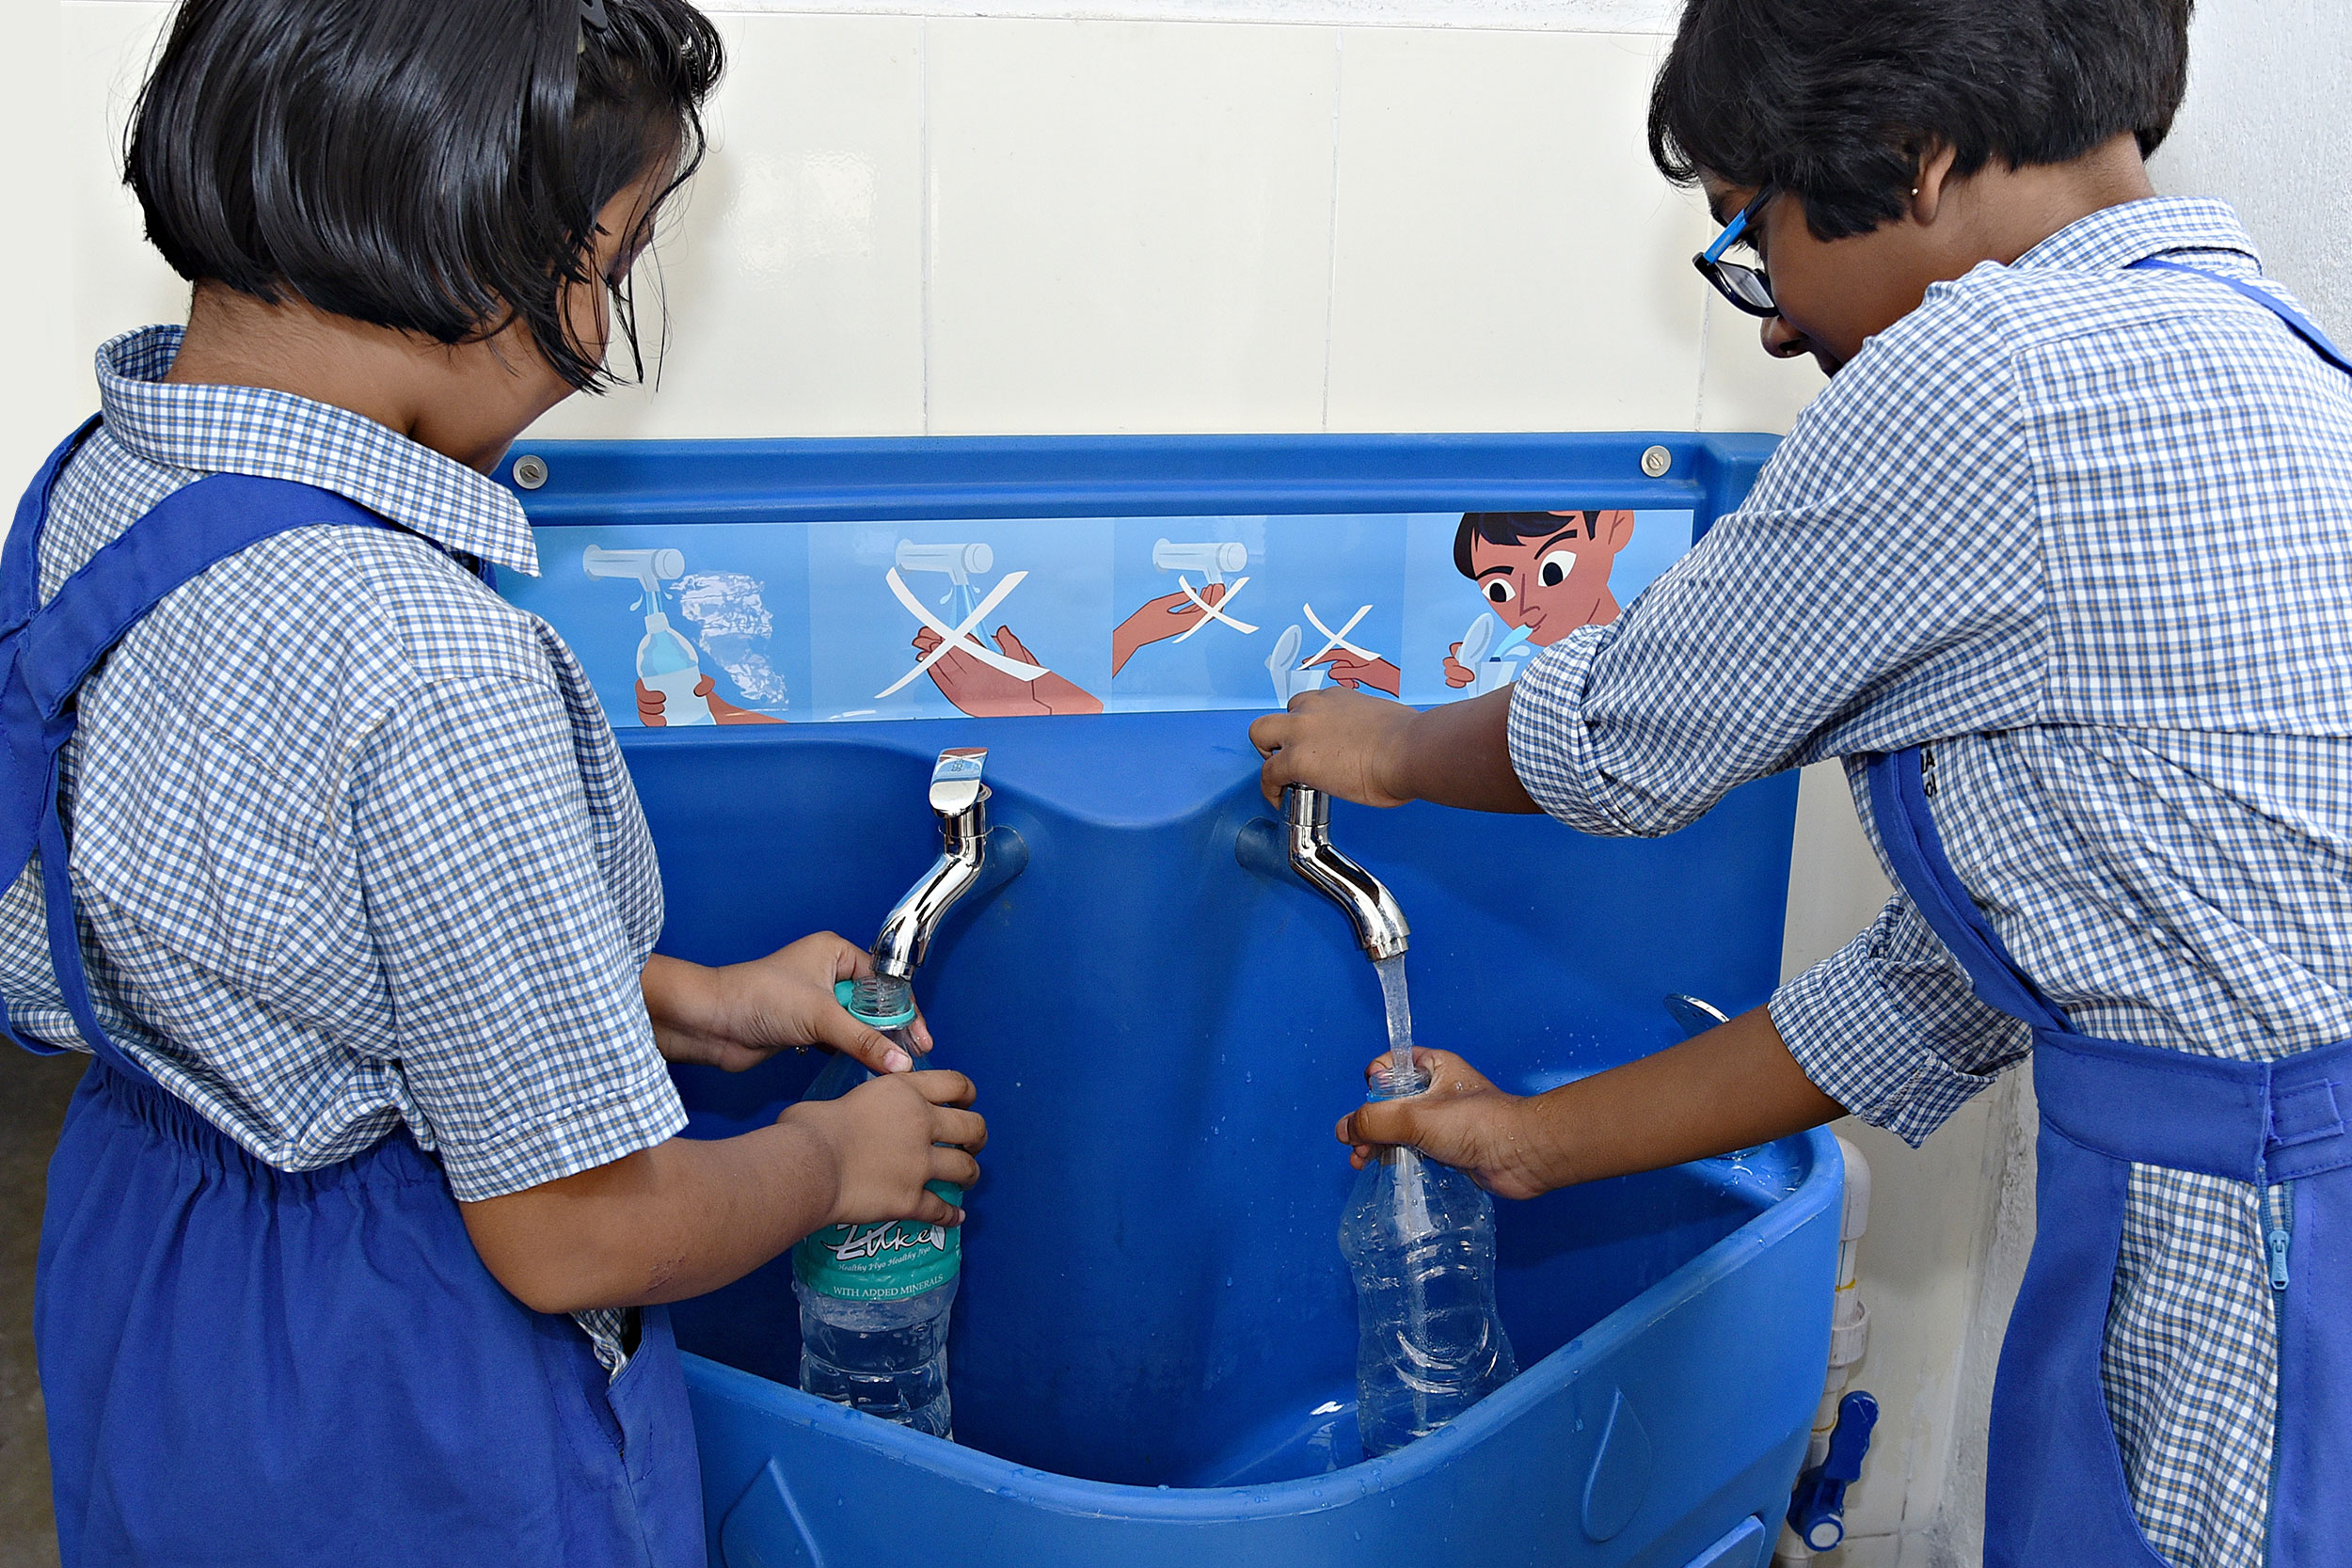 Two young girls in India wearing school uniforms and filling plastic water bottles from a blue Splash drinking water station.